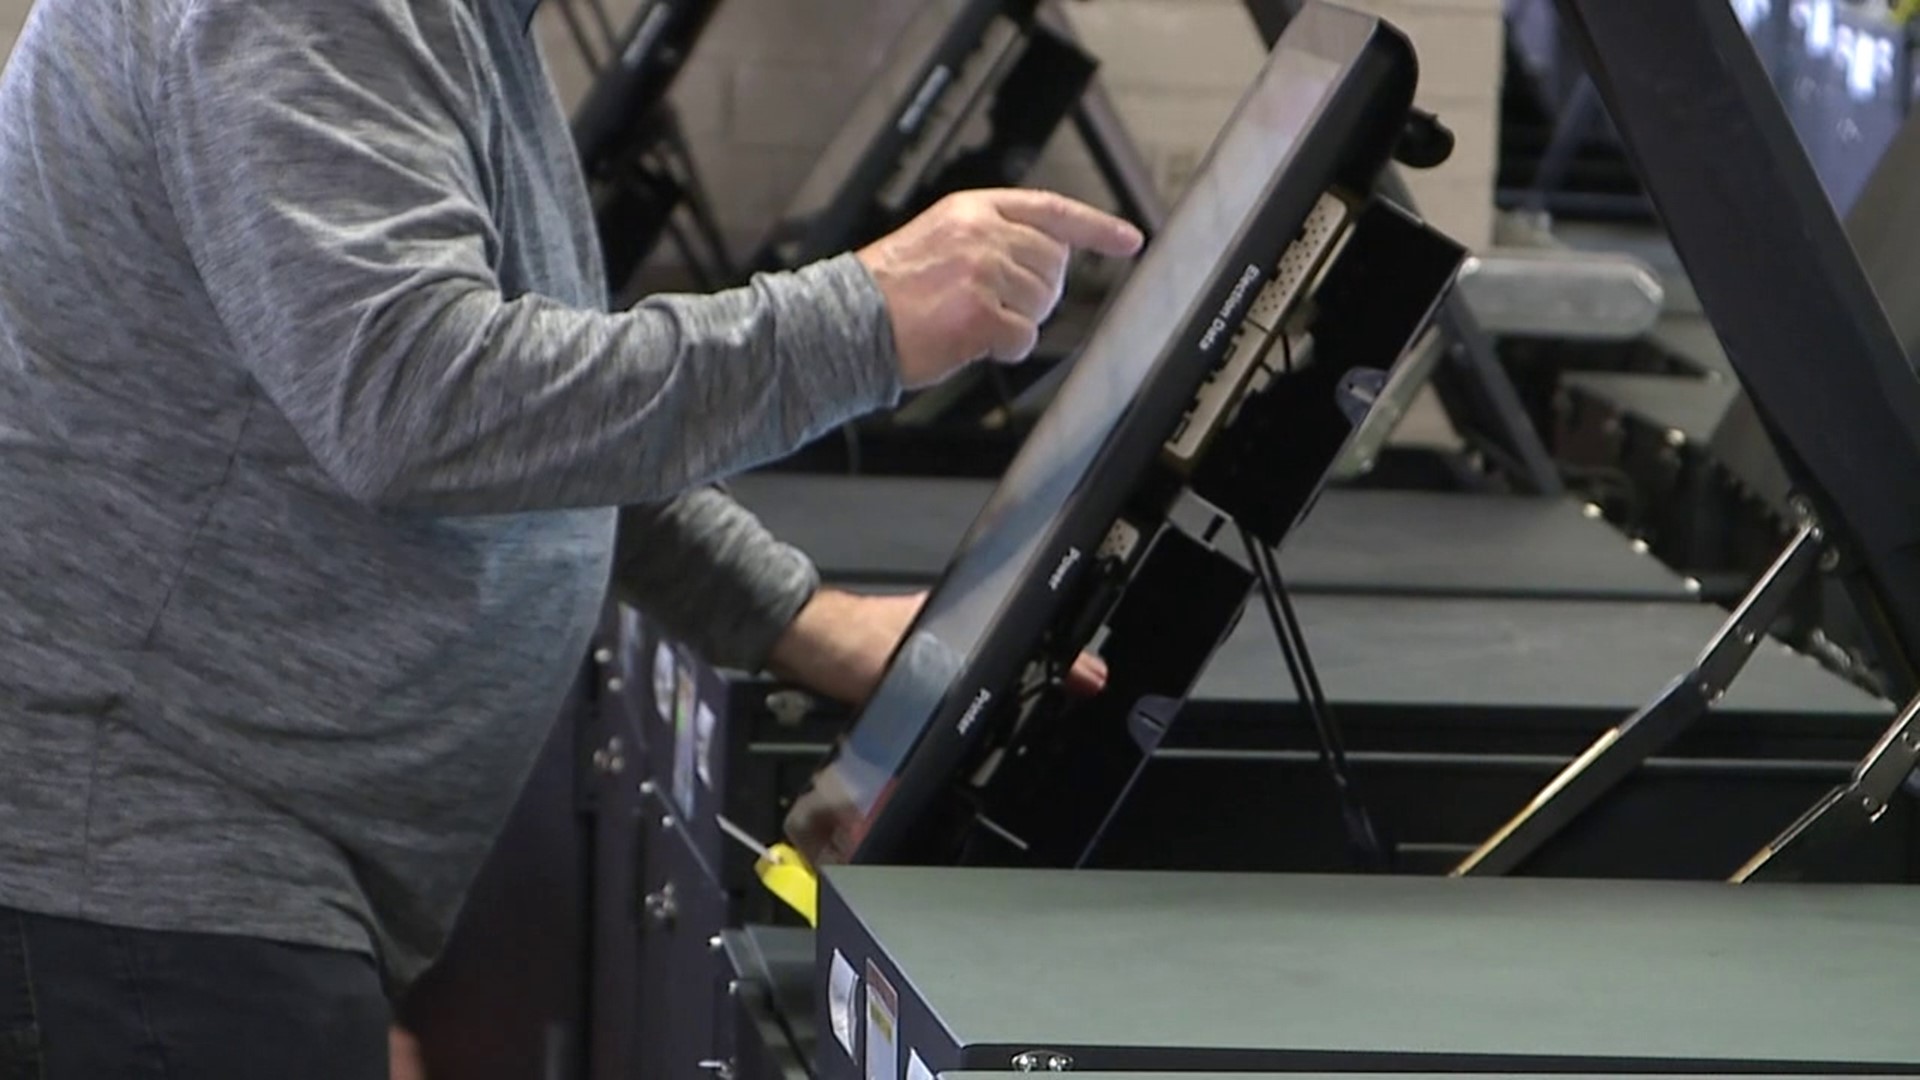 Election officials in Luzerne County are testing machines and stocking them with paper ahead of May's election after so many problems plagued the general election.